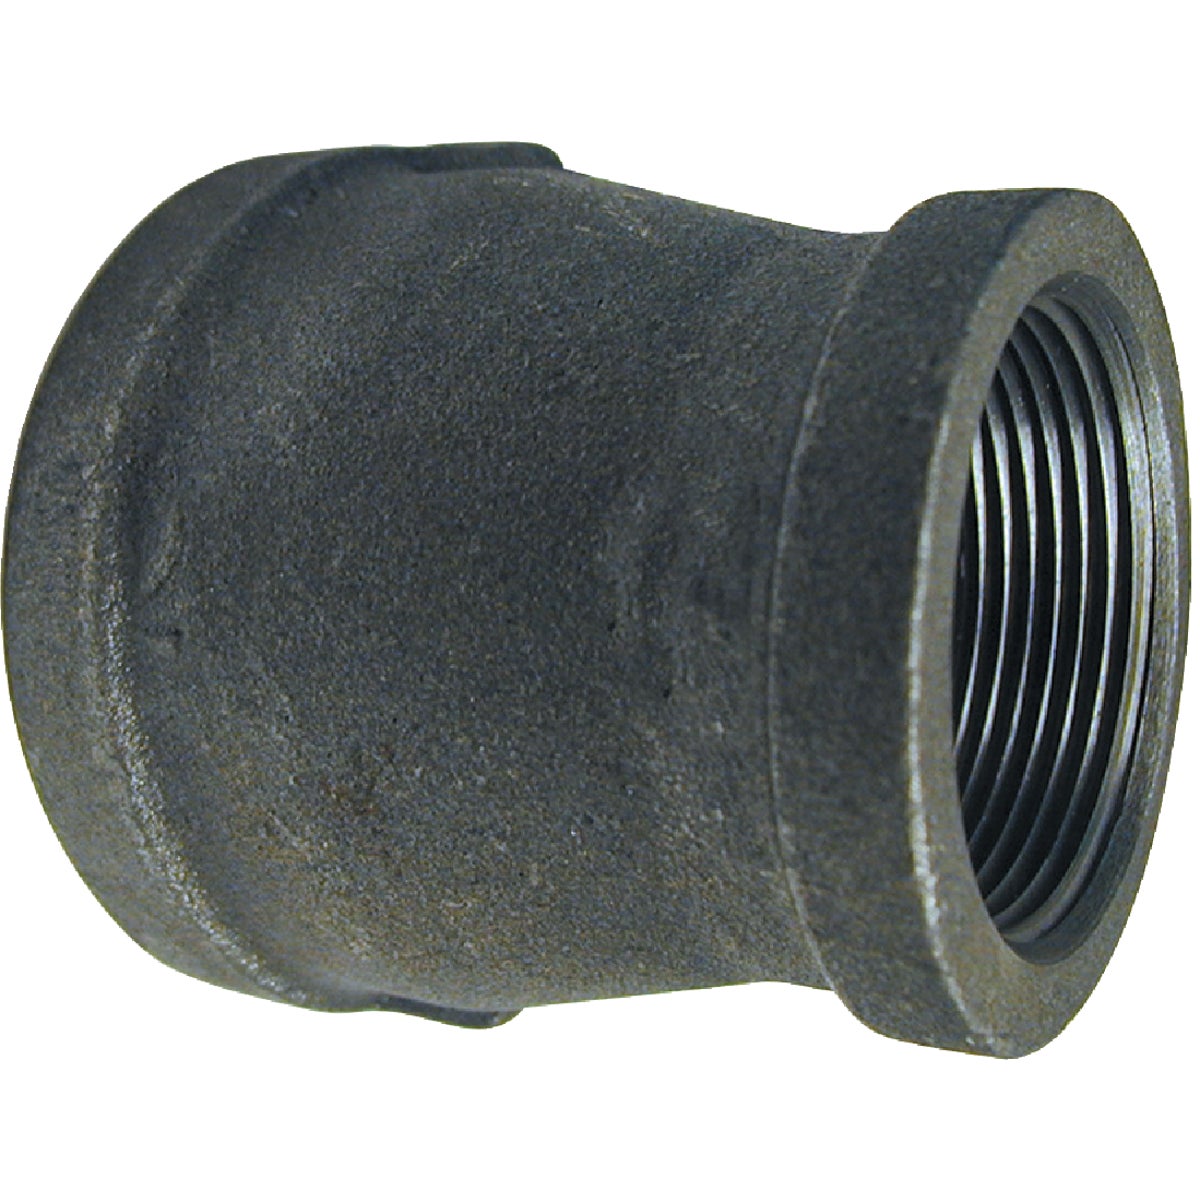 Southland 521-387BG Southland 2 In. x 1-1/2 In. Malleable Black Iron Reducing Coupling 521-387BG